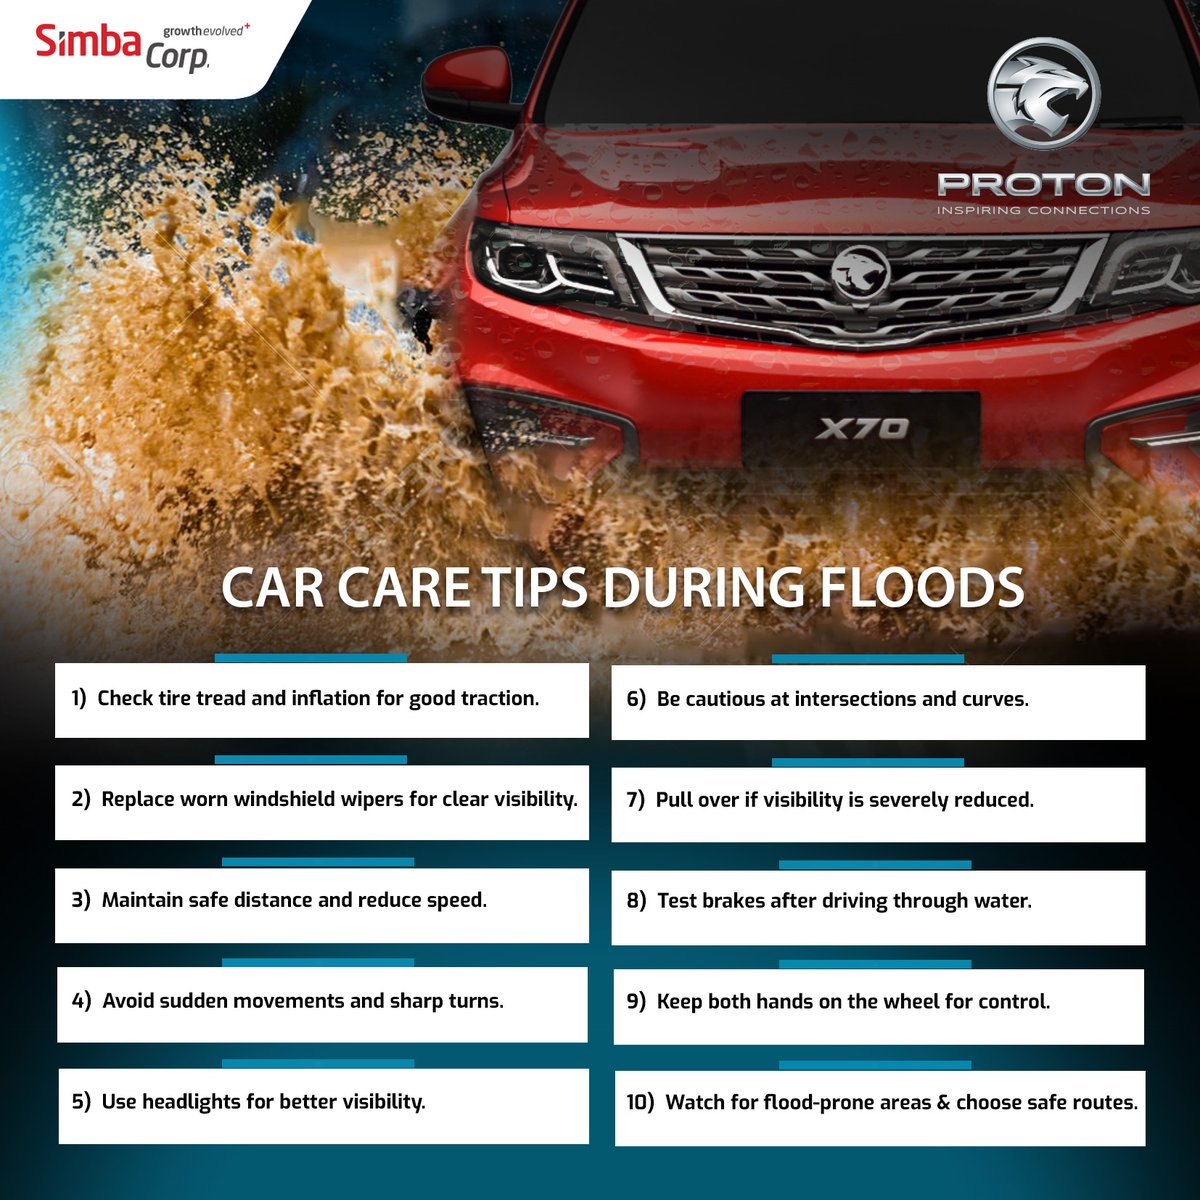 Navigate floods like a pro with our Proton car care tips! Be prepared if you are caught driving through waterlogged roads and ensure you can safely drive when the rain pours. Your safety is our priority. 

#protoncares #flooding #drivesafe